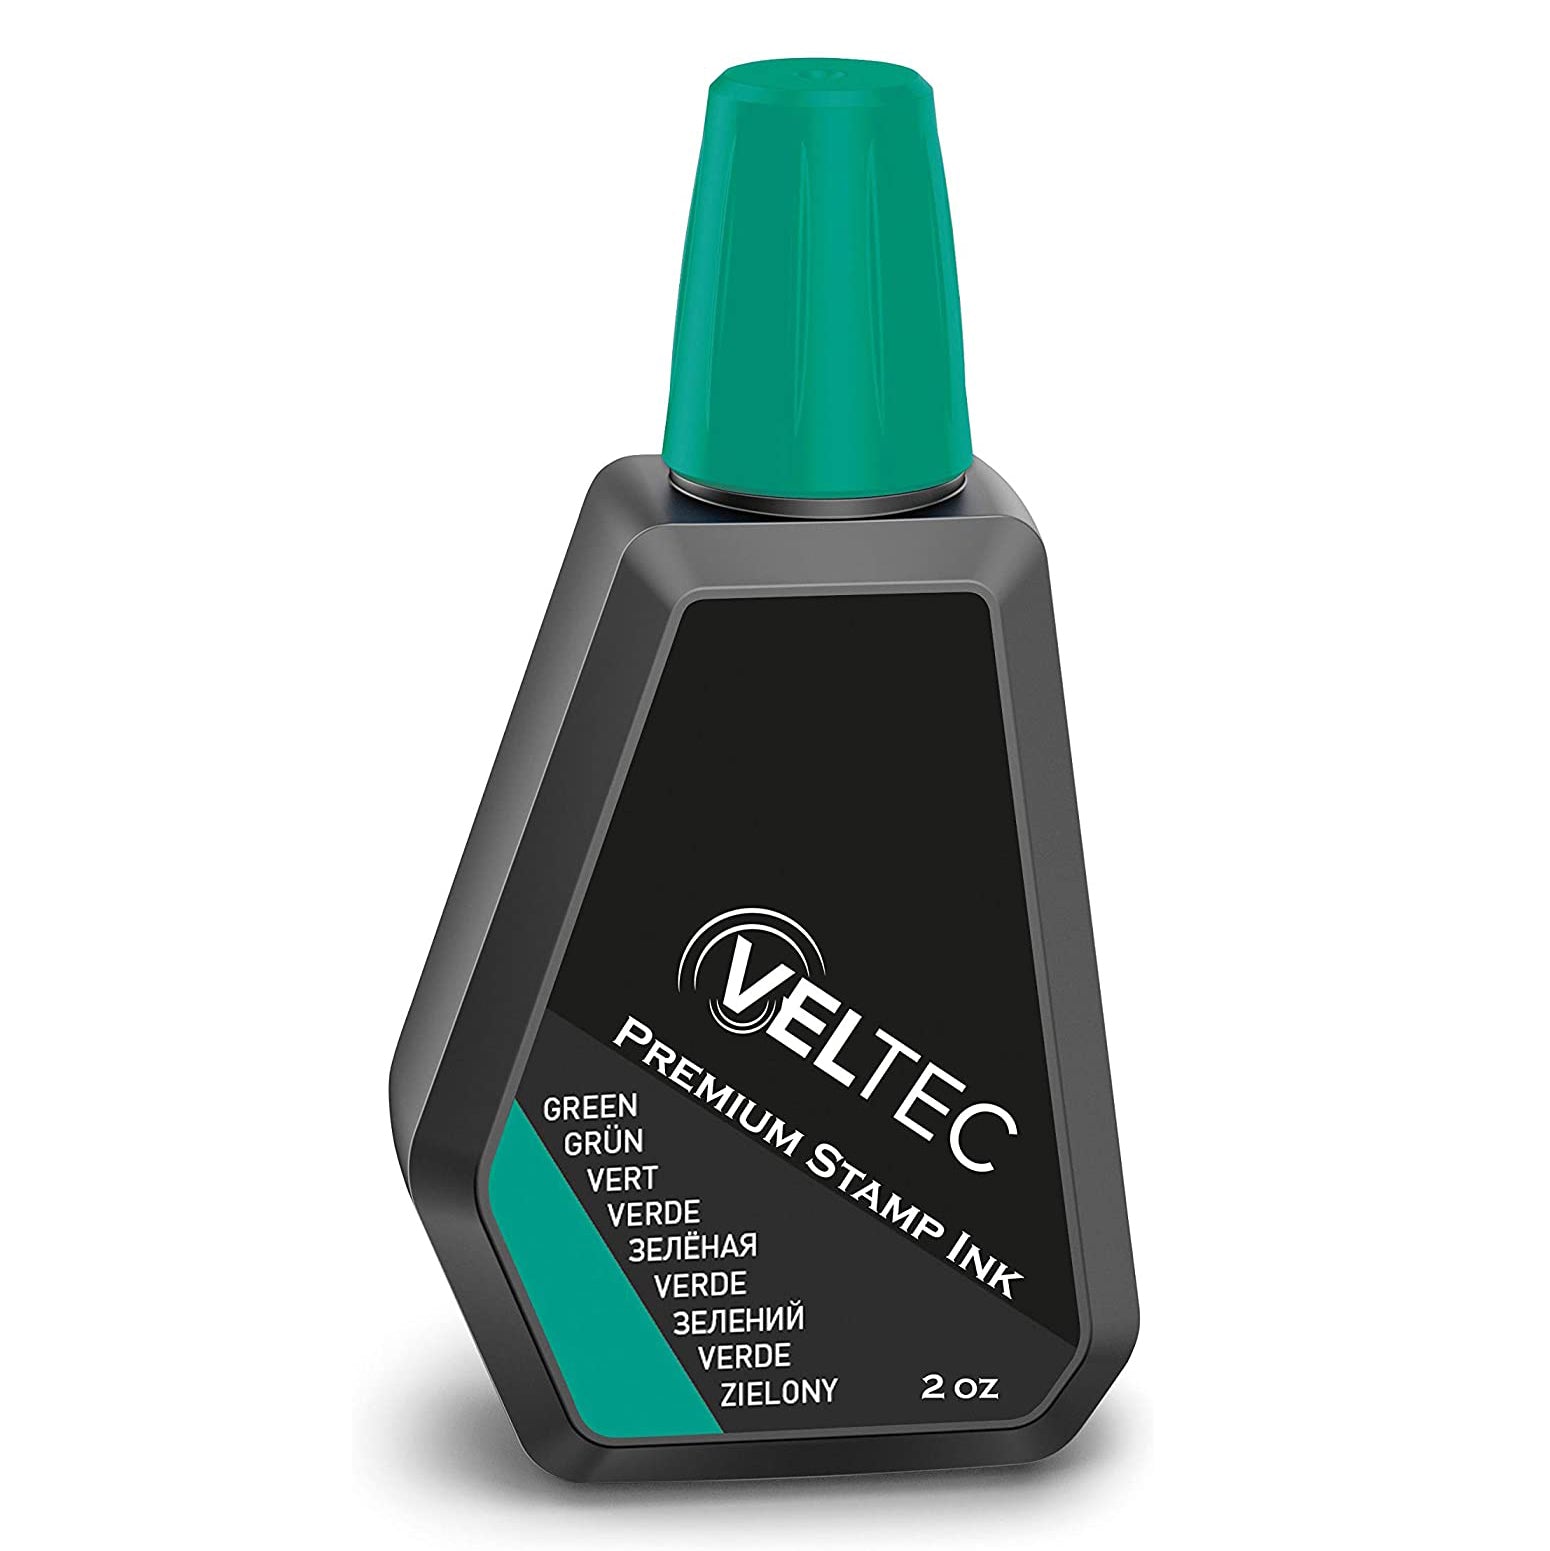 Premium Refill Ink for self Inking Stamps and Stamp Pads, Green Color - 4  oz. - Refill Inks - Stamp Accessories